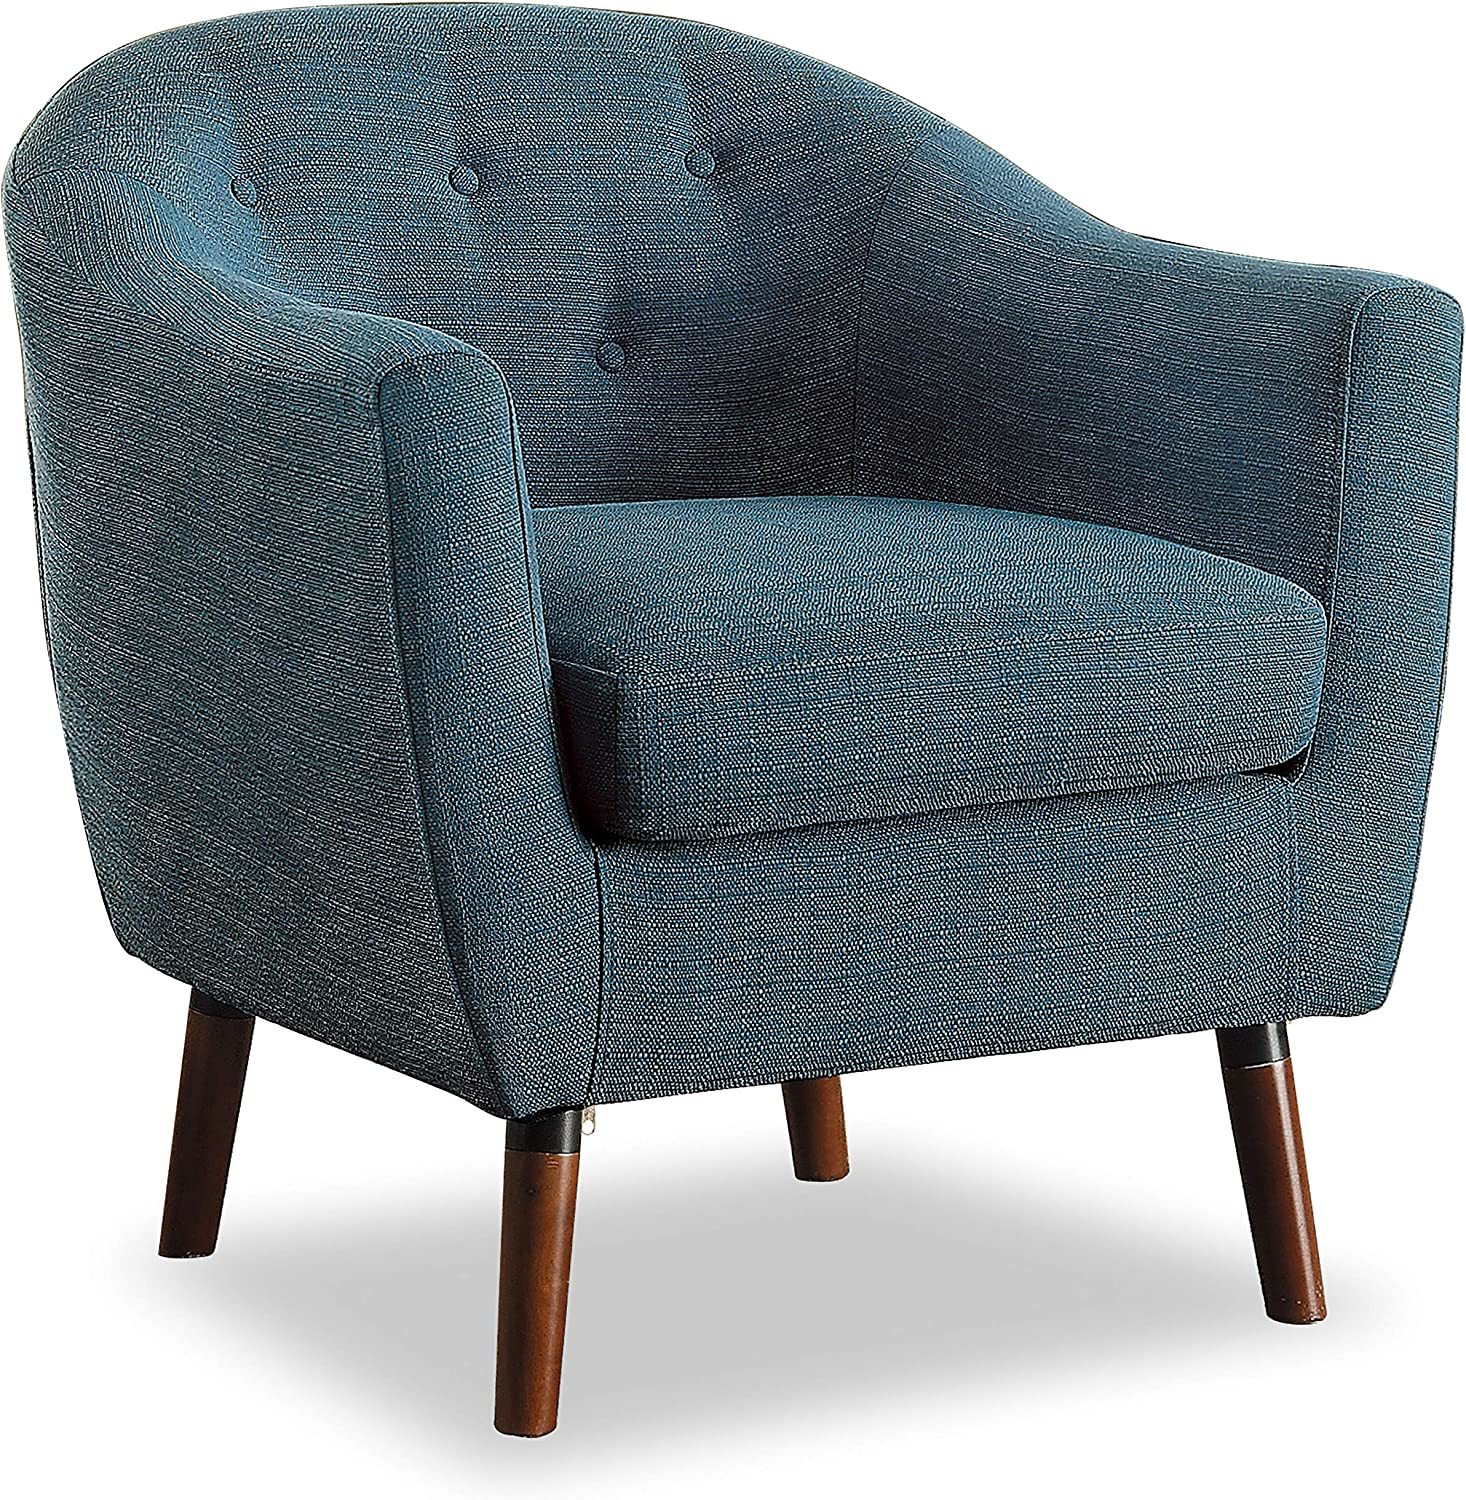 Primary image for Homelegance Fabric Barrel Chair, Blue